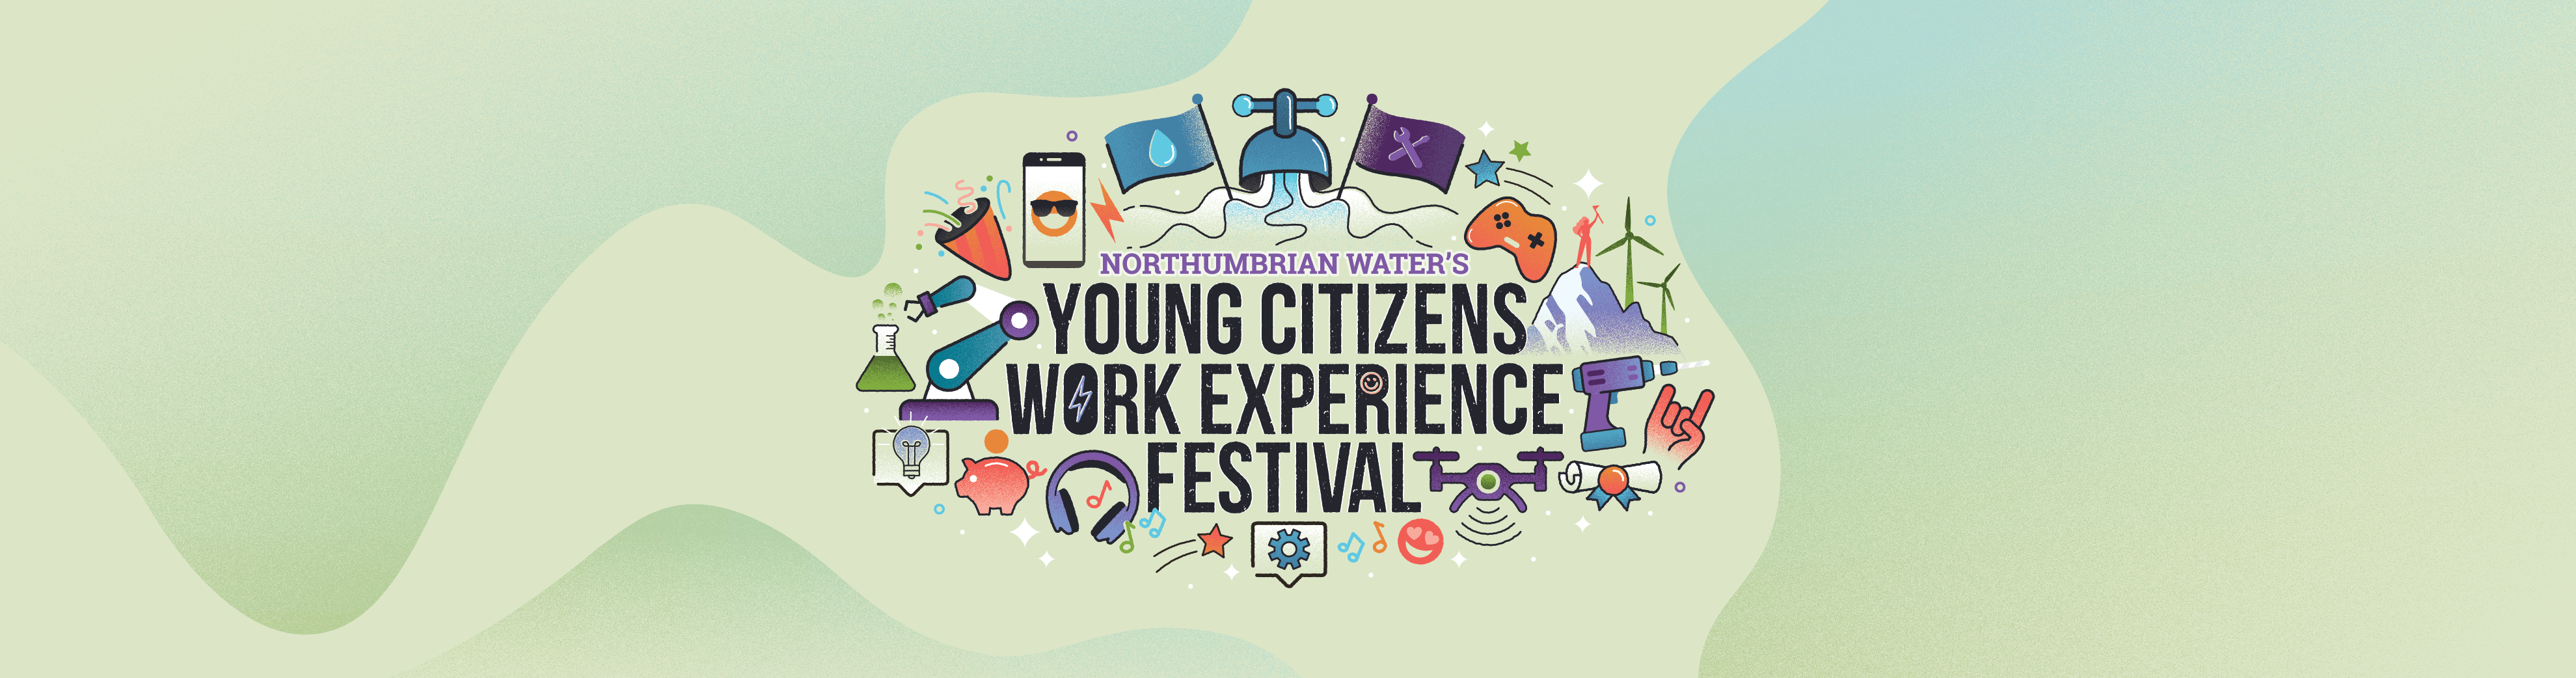 Innovation Festival 2024 Young Citizen's Work Experience Festival logo and icons